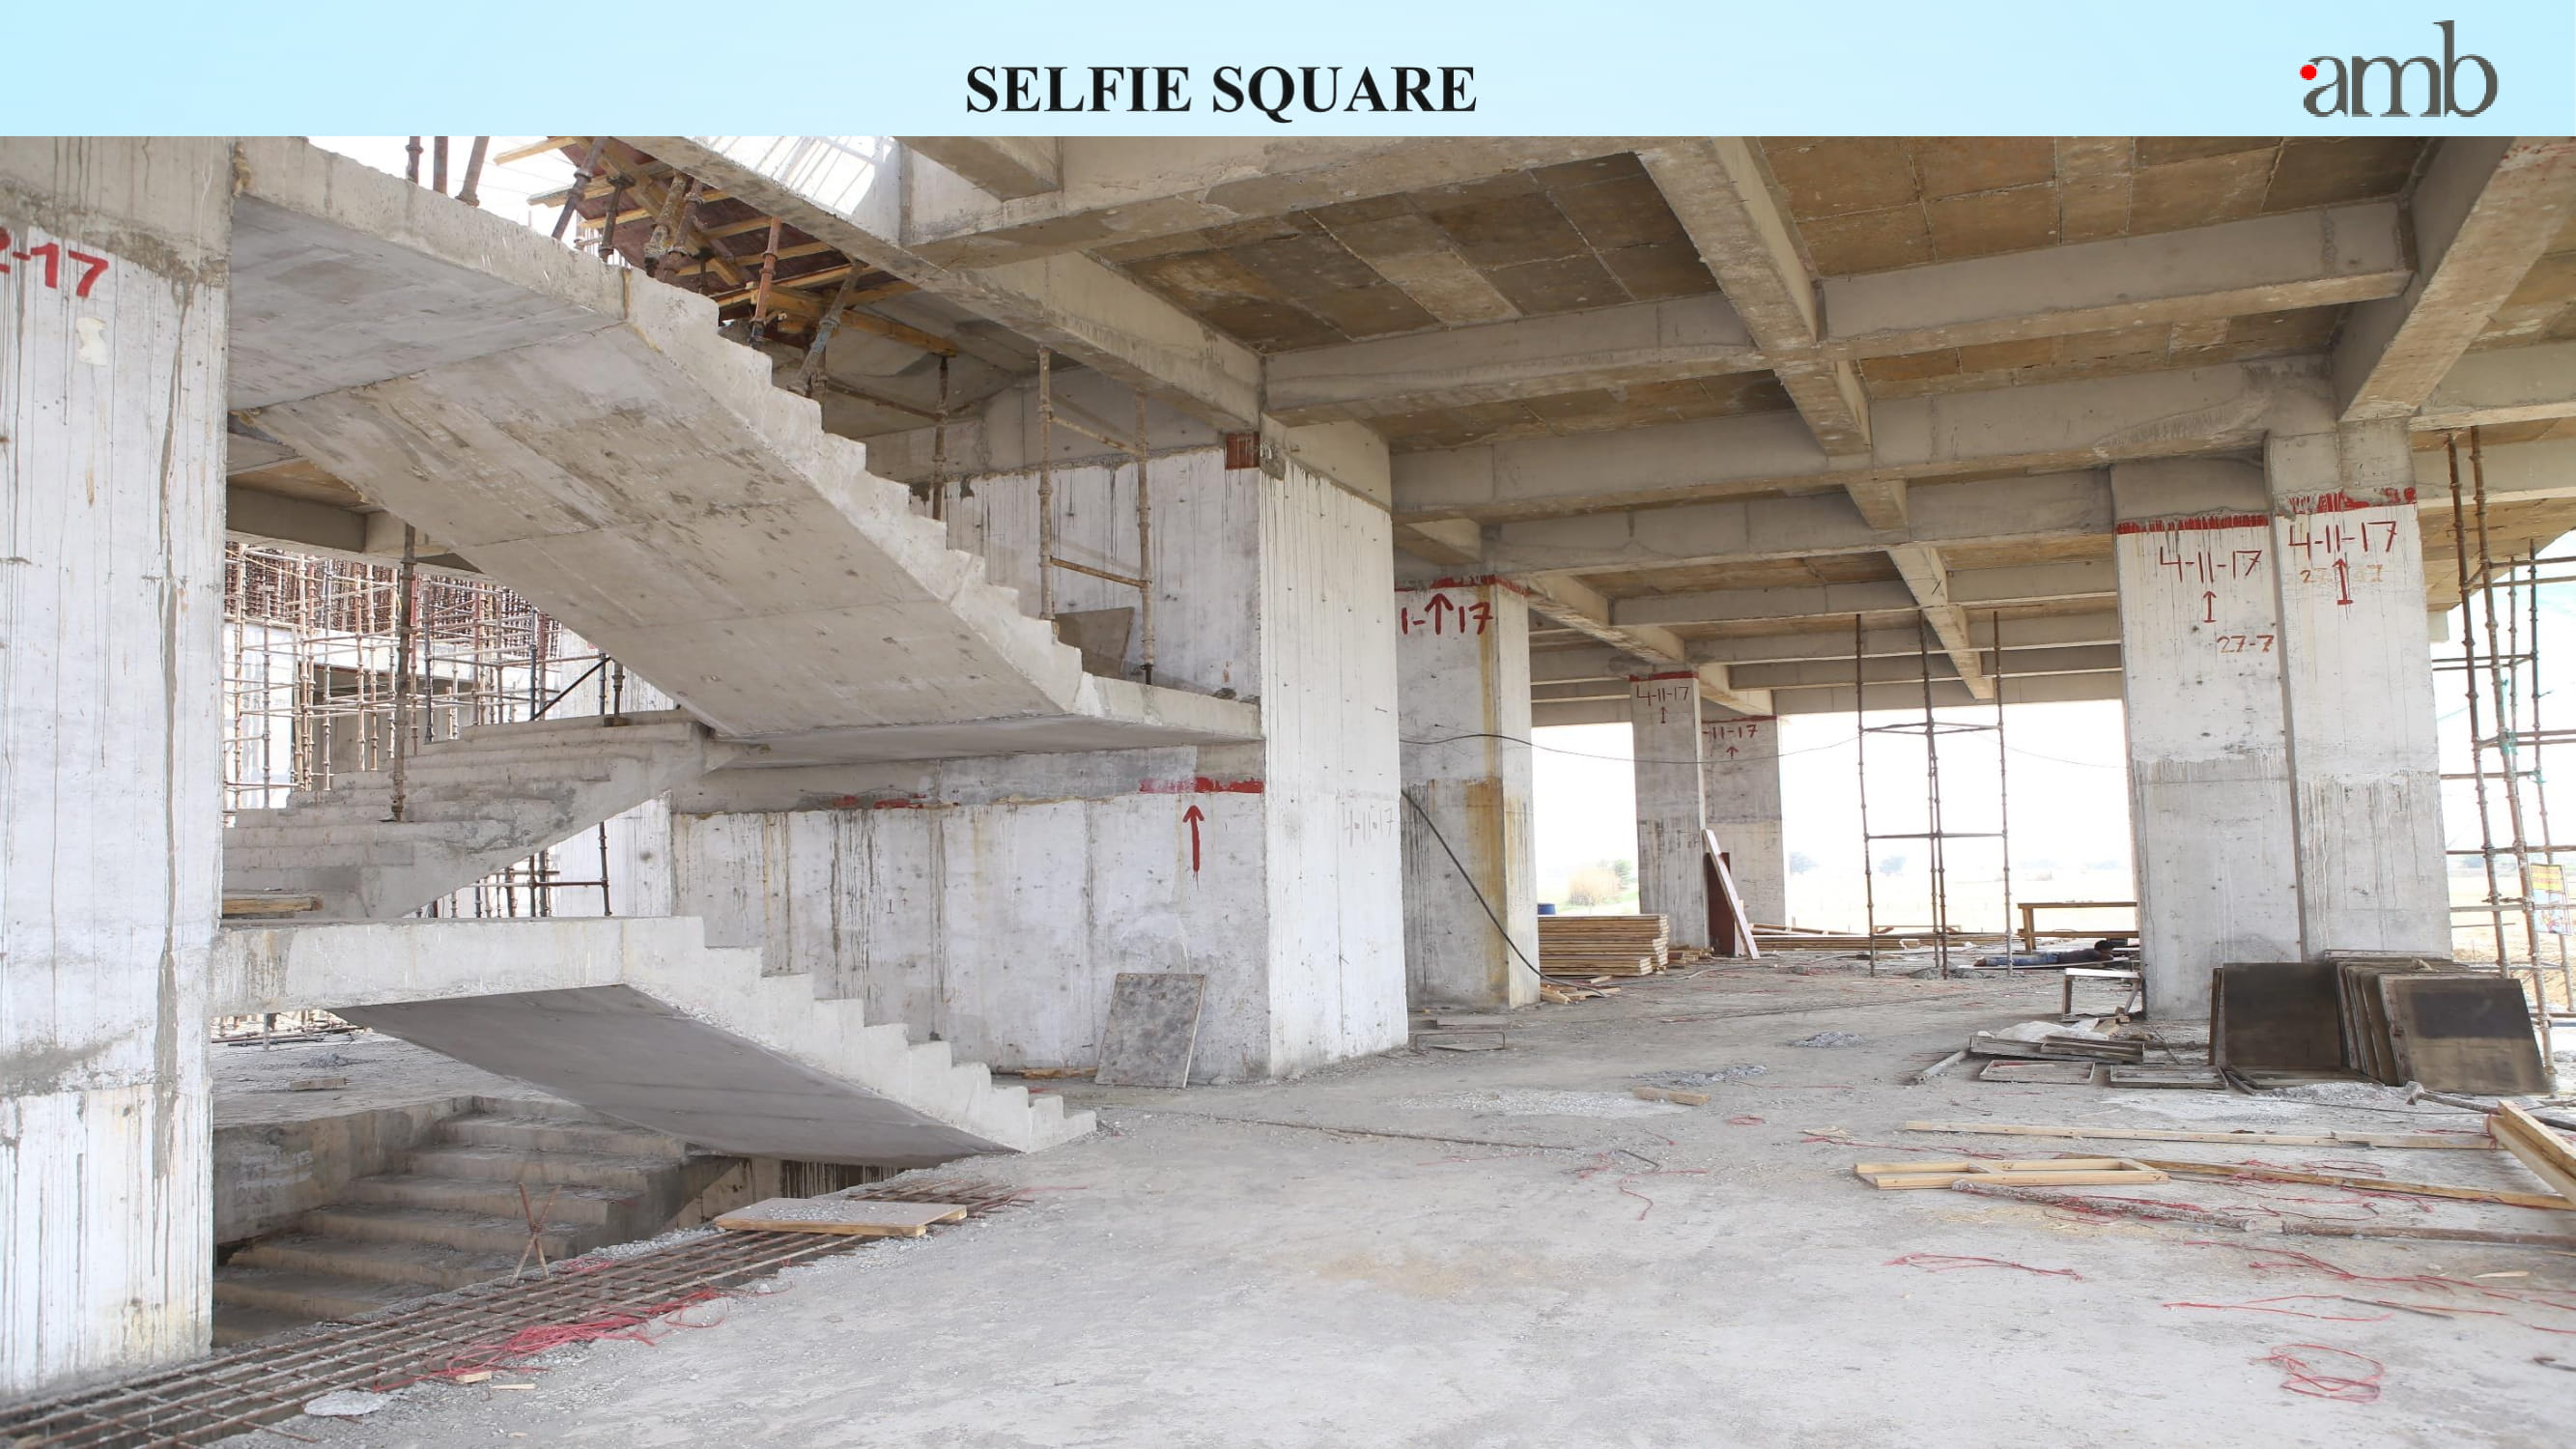 Construction update of Amb Selfie Square, March 2018 Update